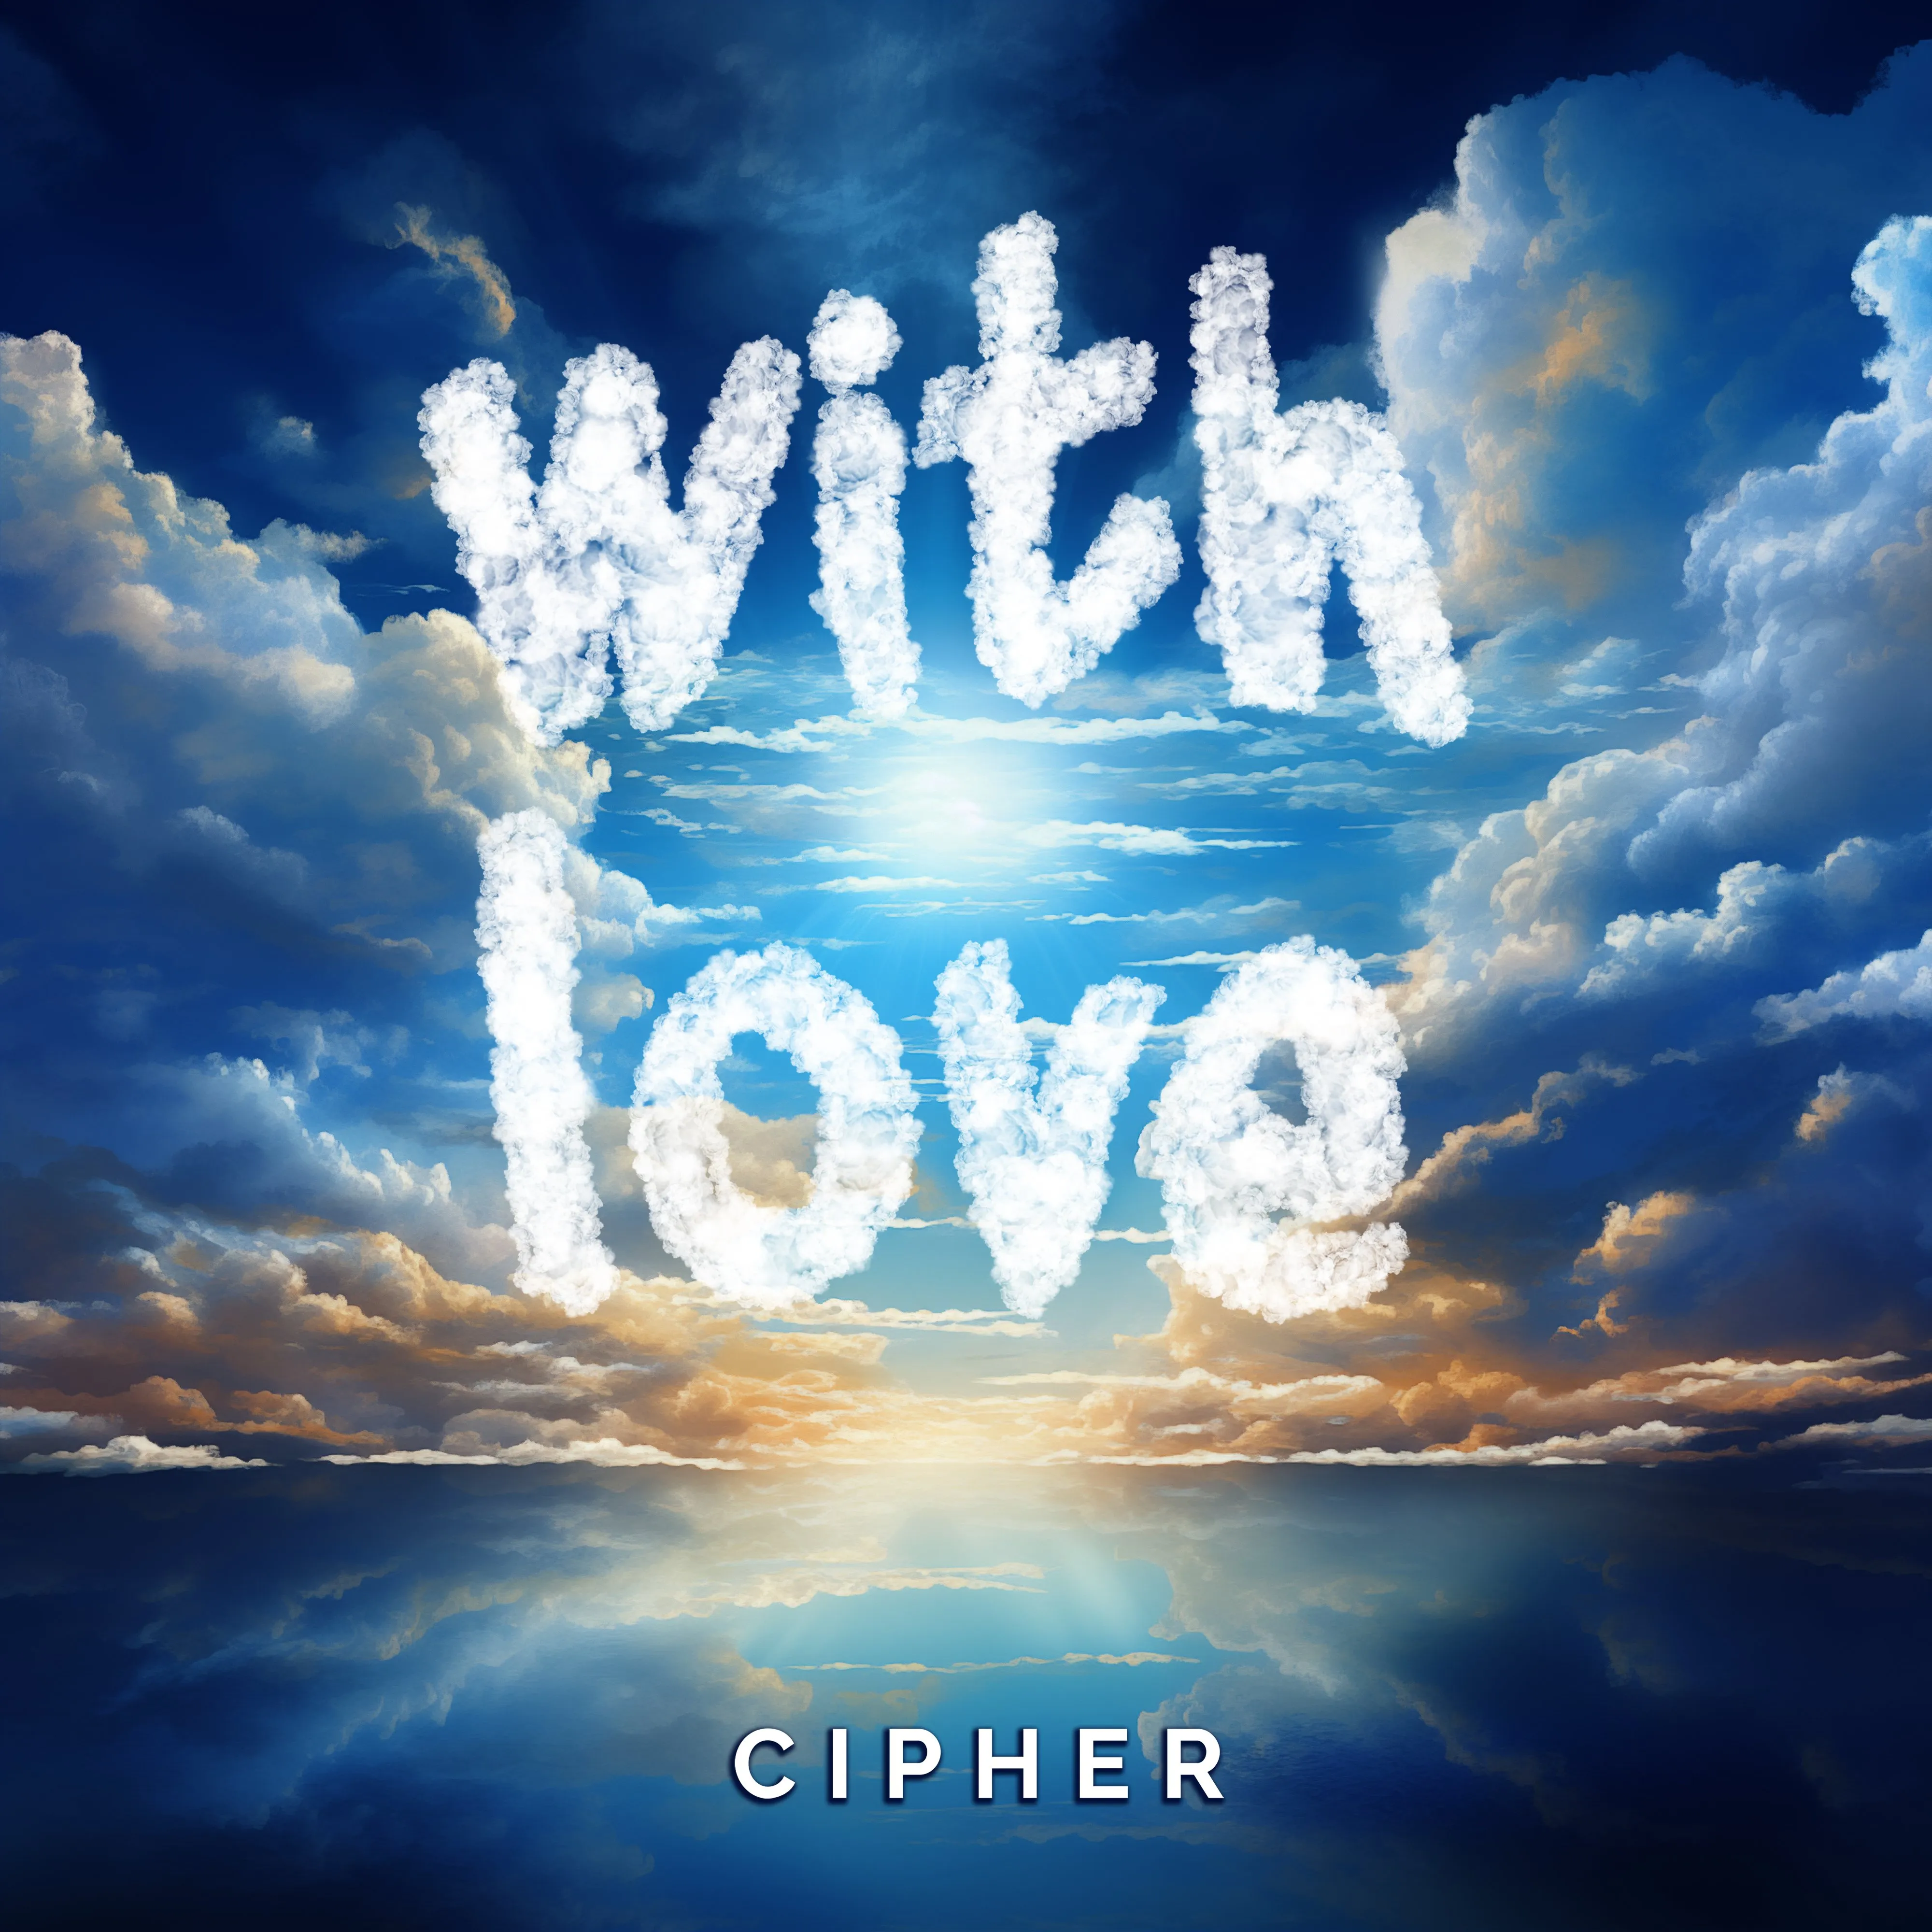 With Love by Cipher